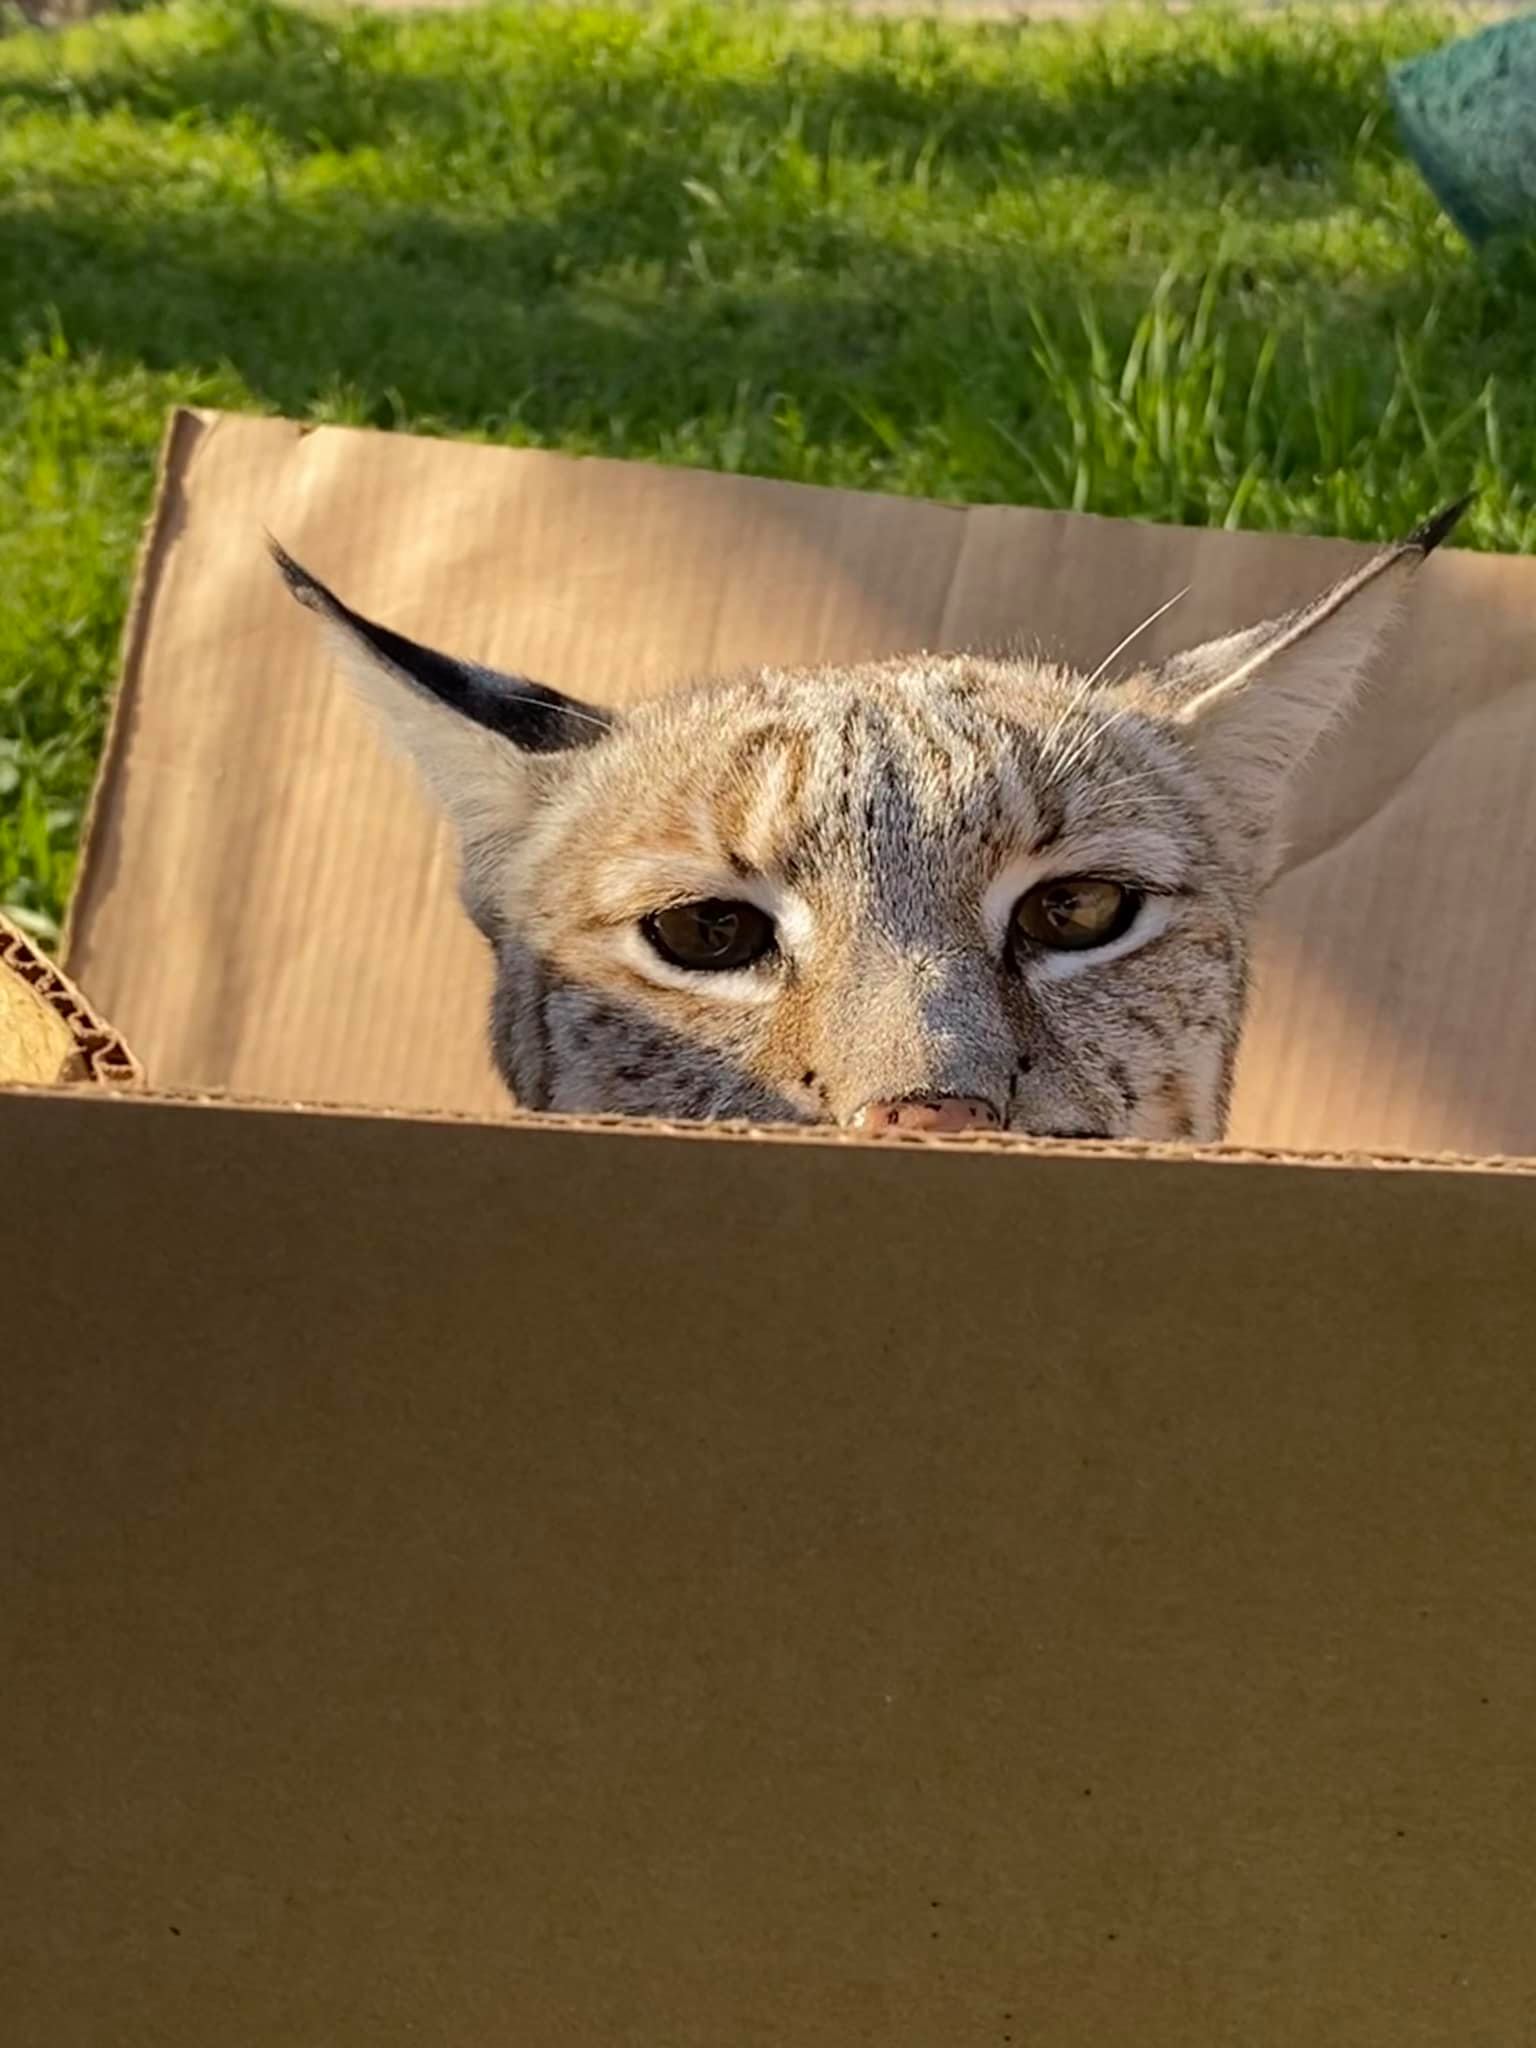 sola in a box